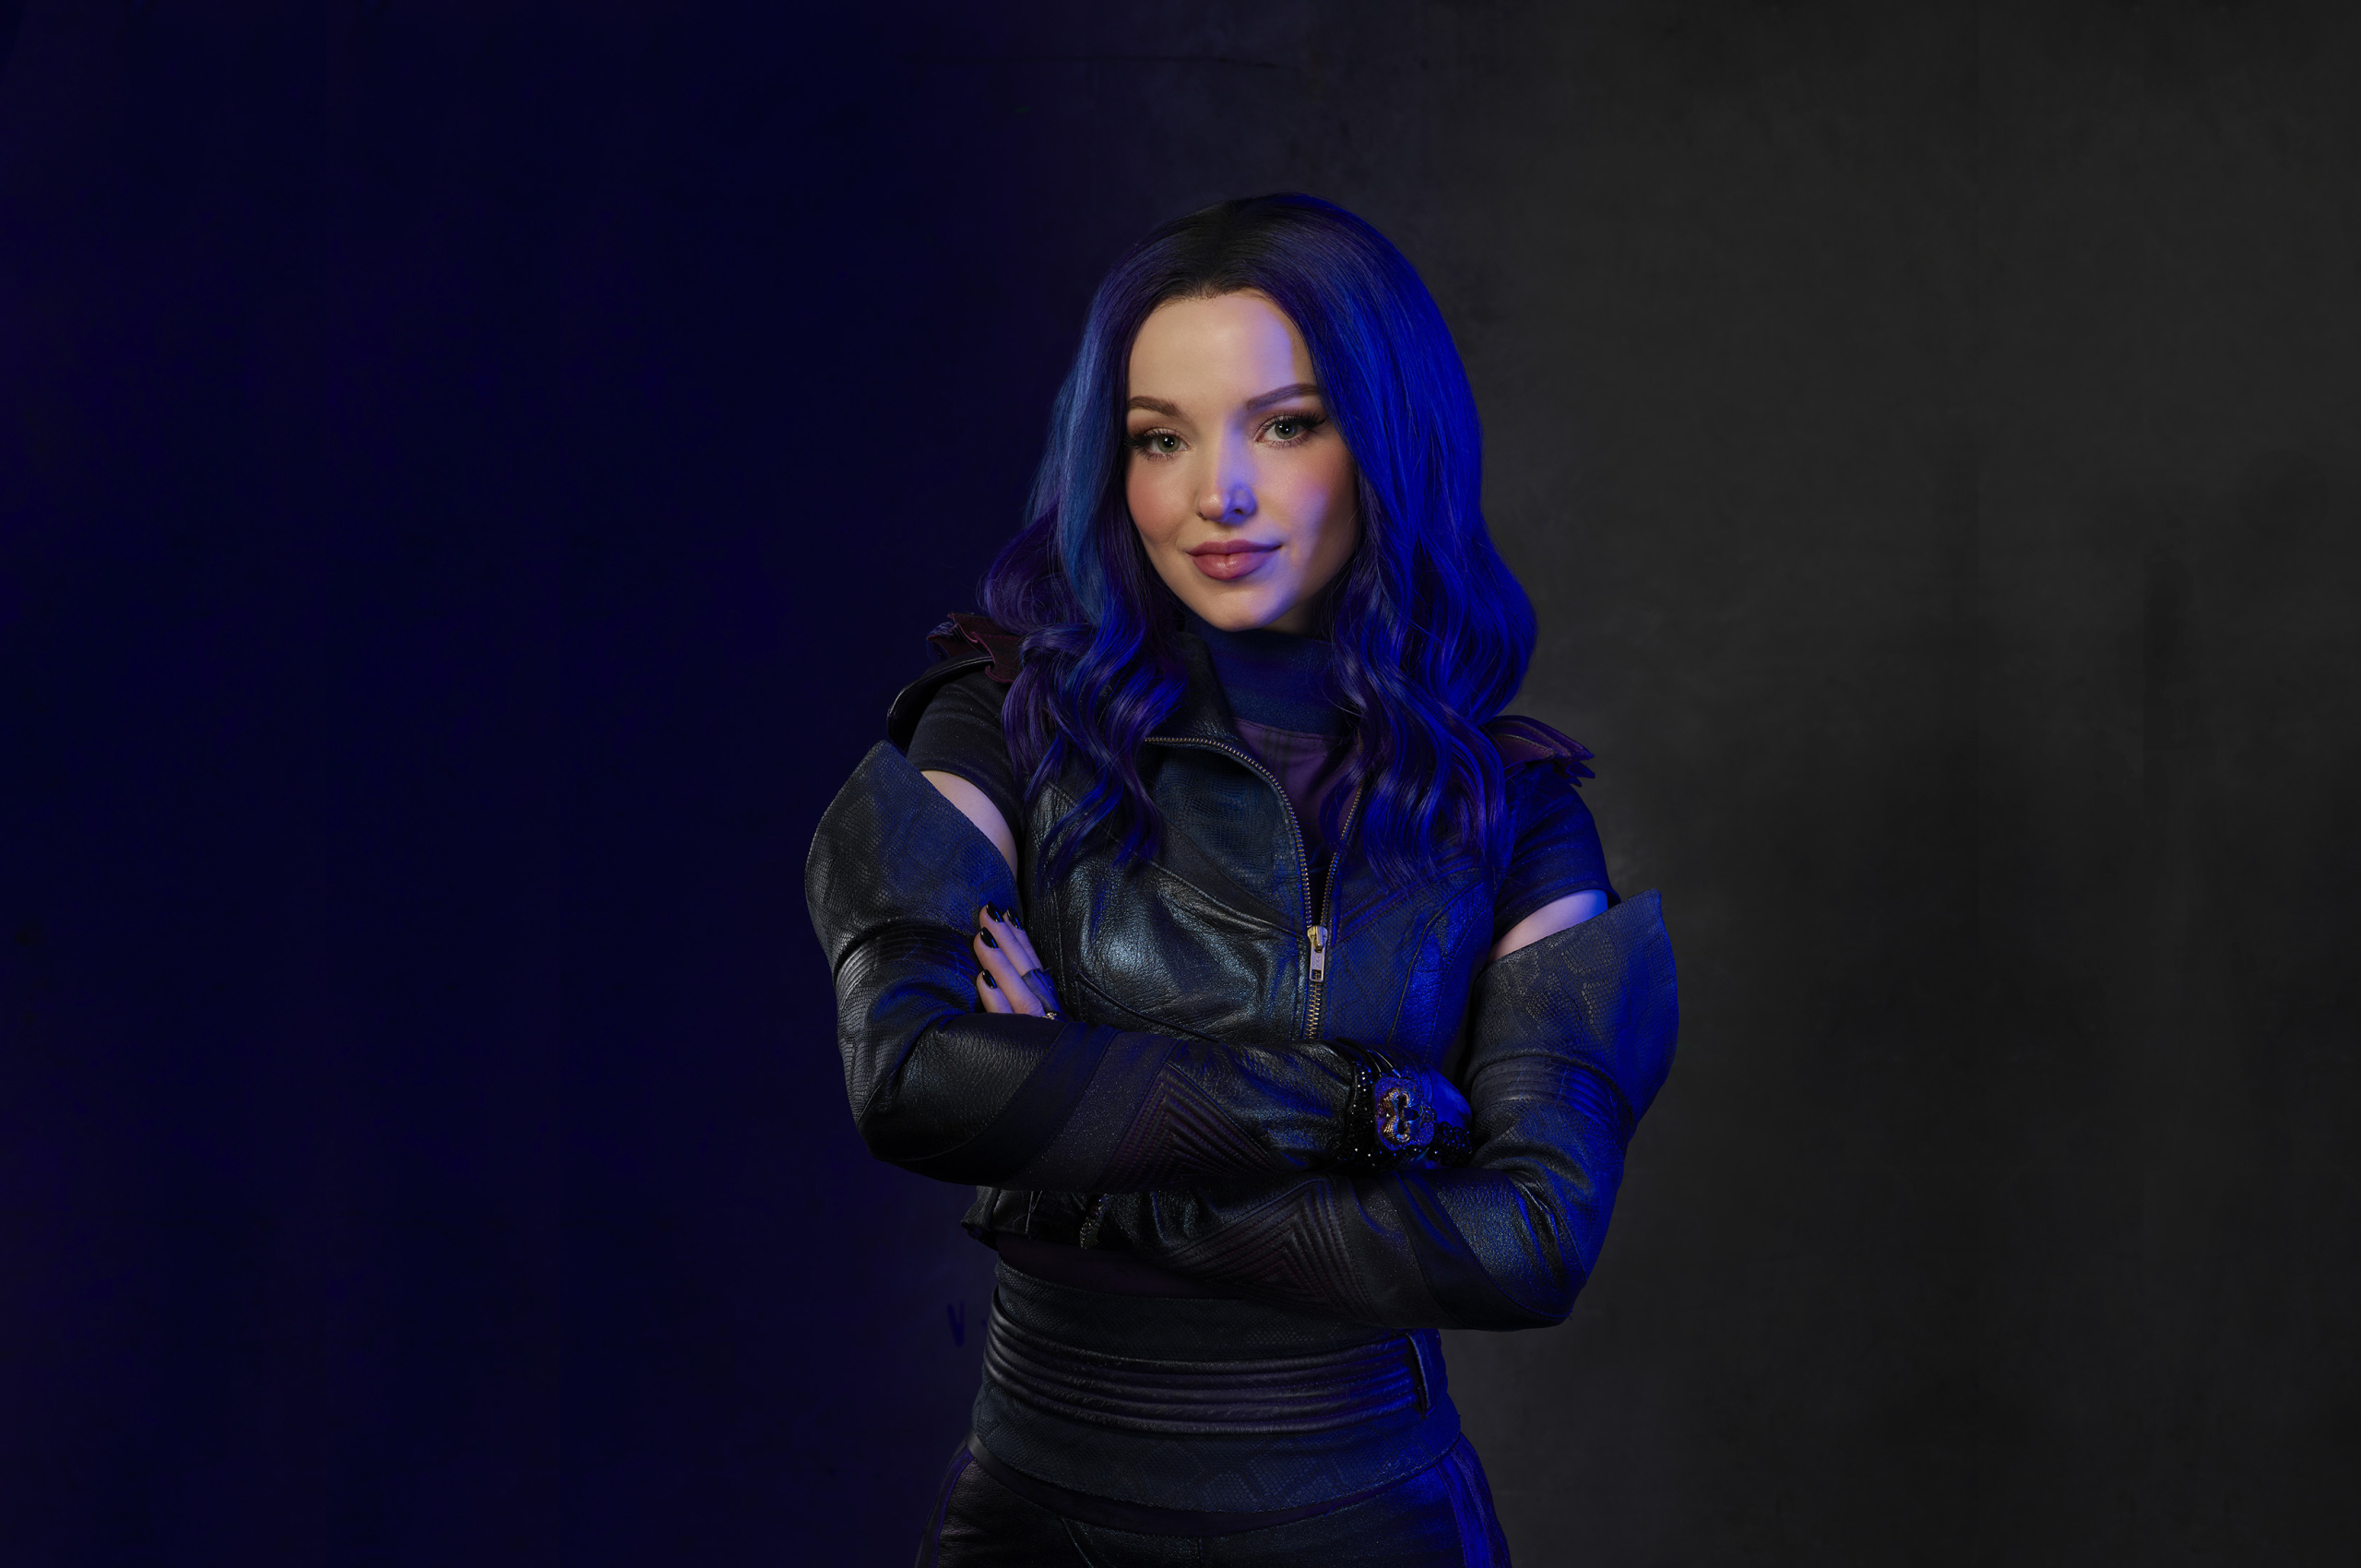 2560x1700 Descendants 3 Dove Cameron As Mal Chromebook Pixel Wallpaper Hd Movies 4k Wallpapers Images Photos And Background Wallpapers Den